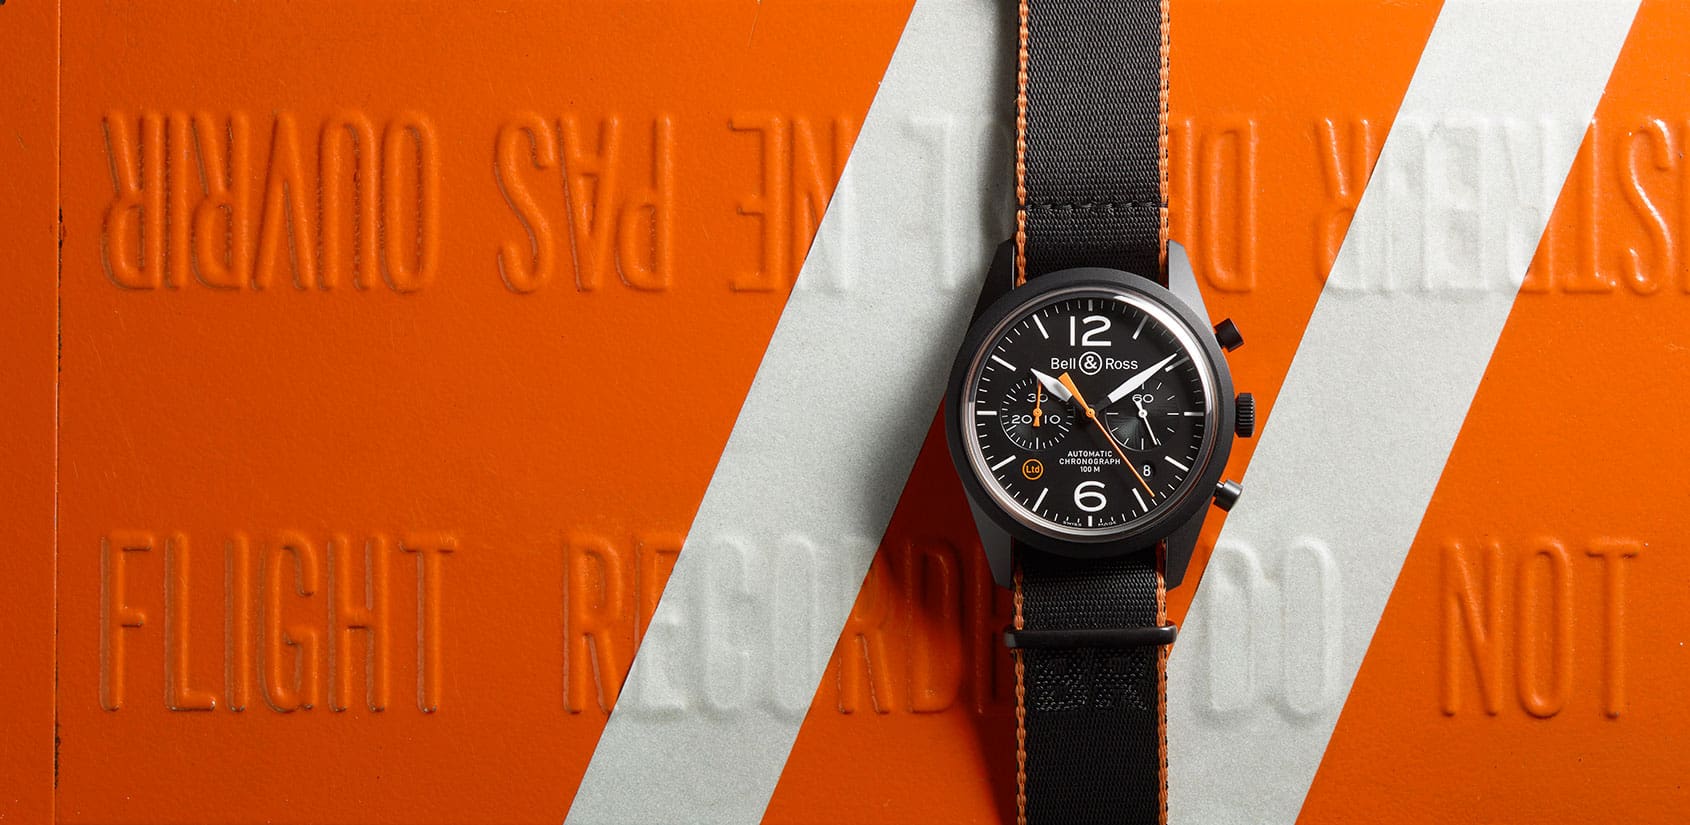 HOLIDAY BUYING GUIDE: The Bell & Ross BR 126 Carbon Orange